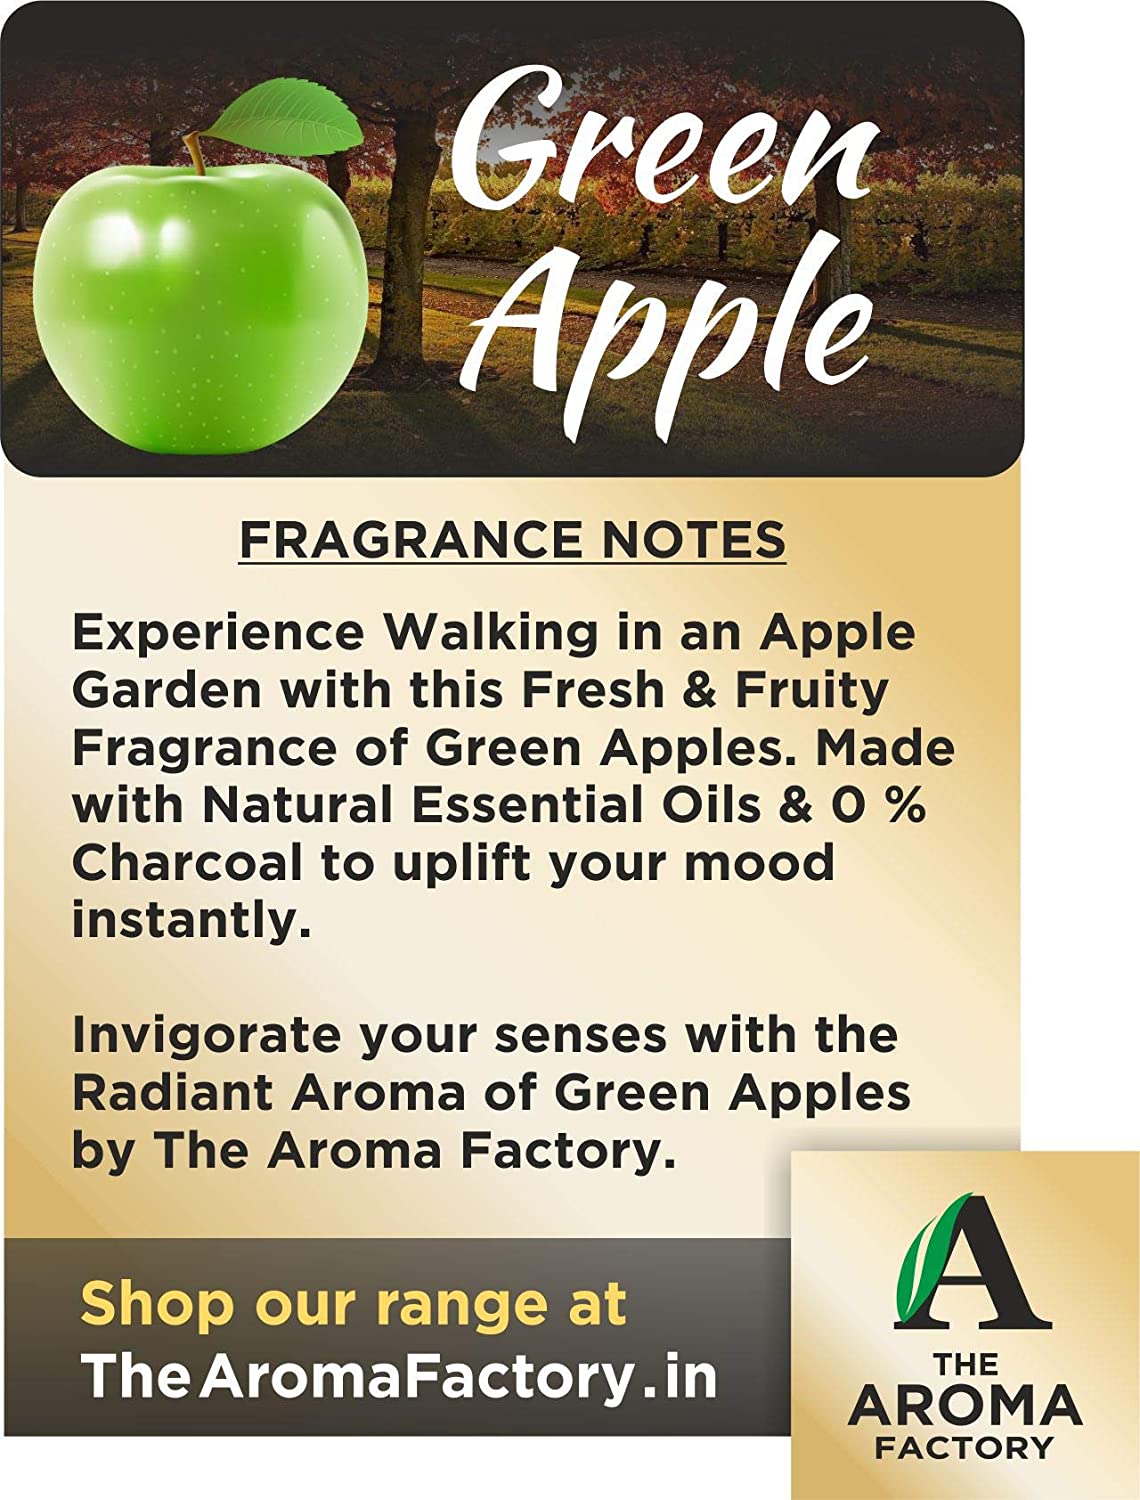 The Aroma Factory Chocolate & Green Apple Agarbatti (Charcoal Free & Low Smoke) Bottle Pack of 2 x 100